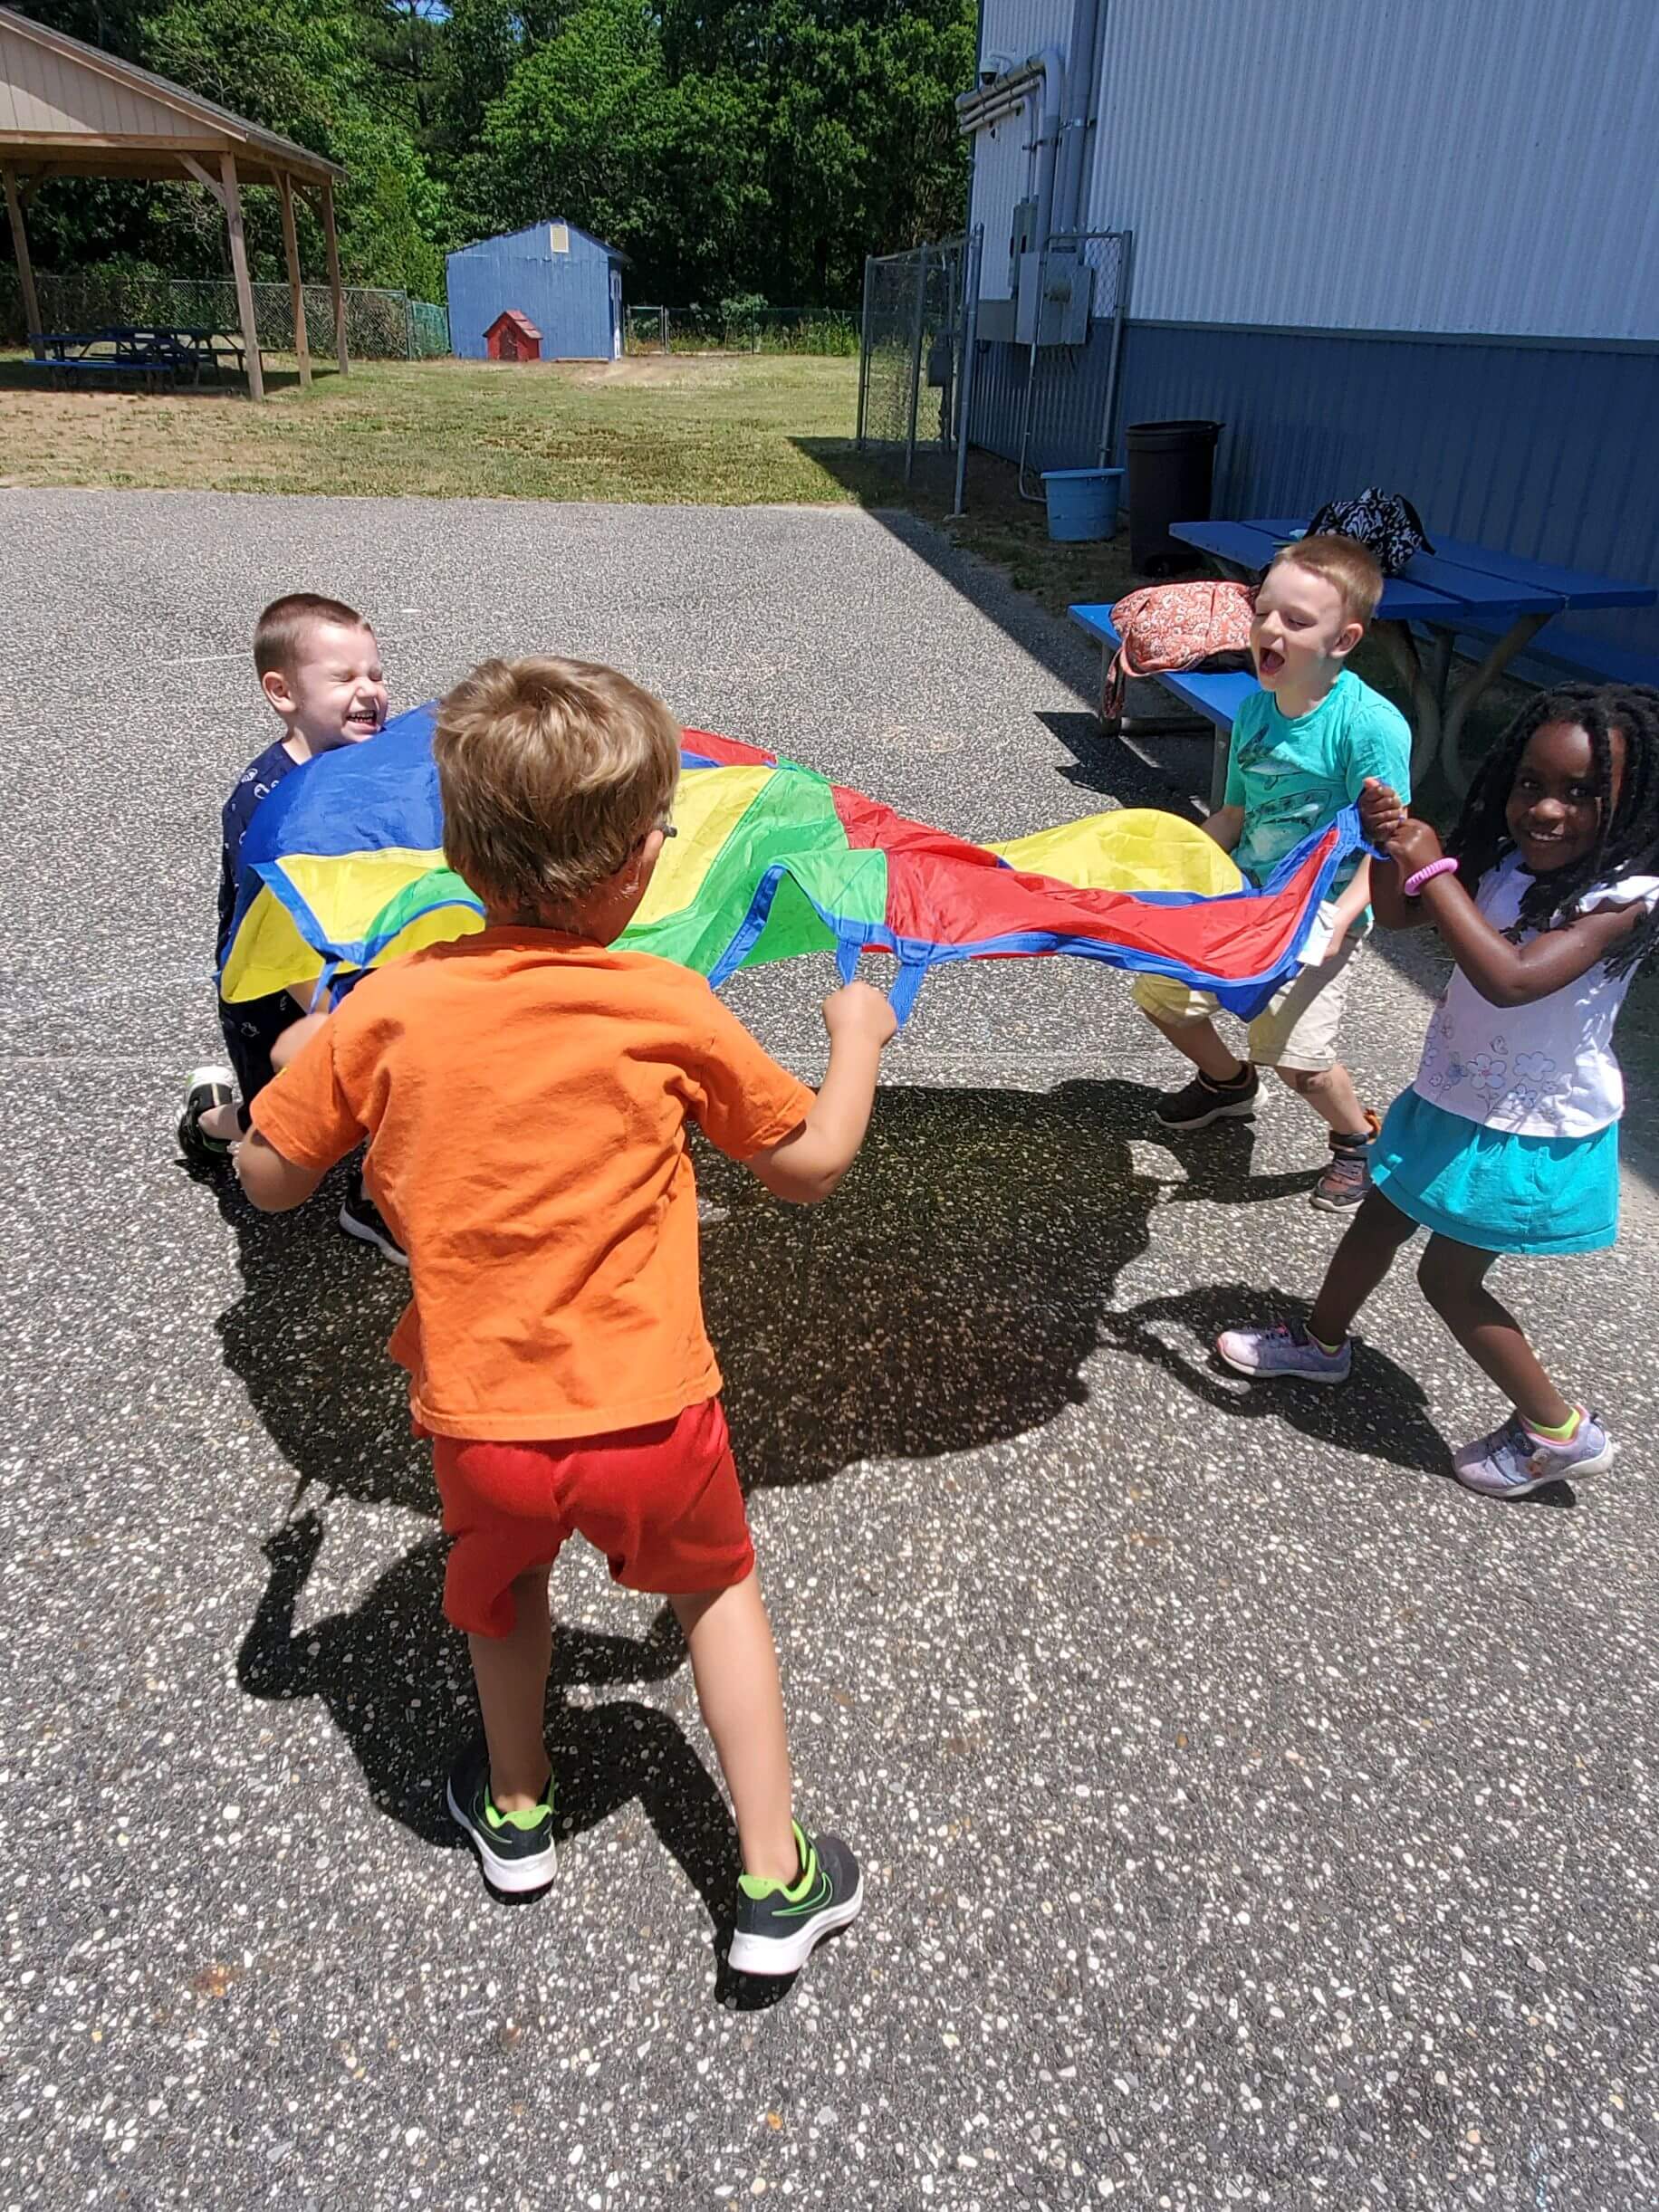 Playing outdoors is high on the list of summer youth camps operating this year